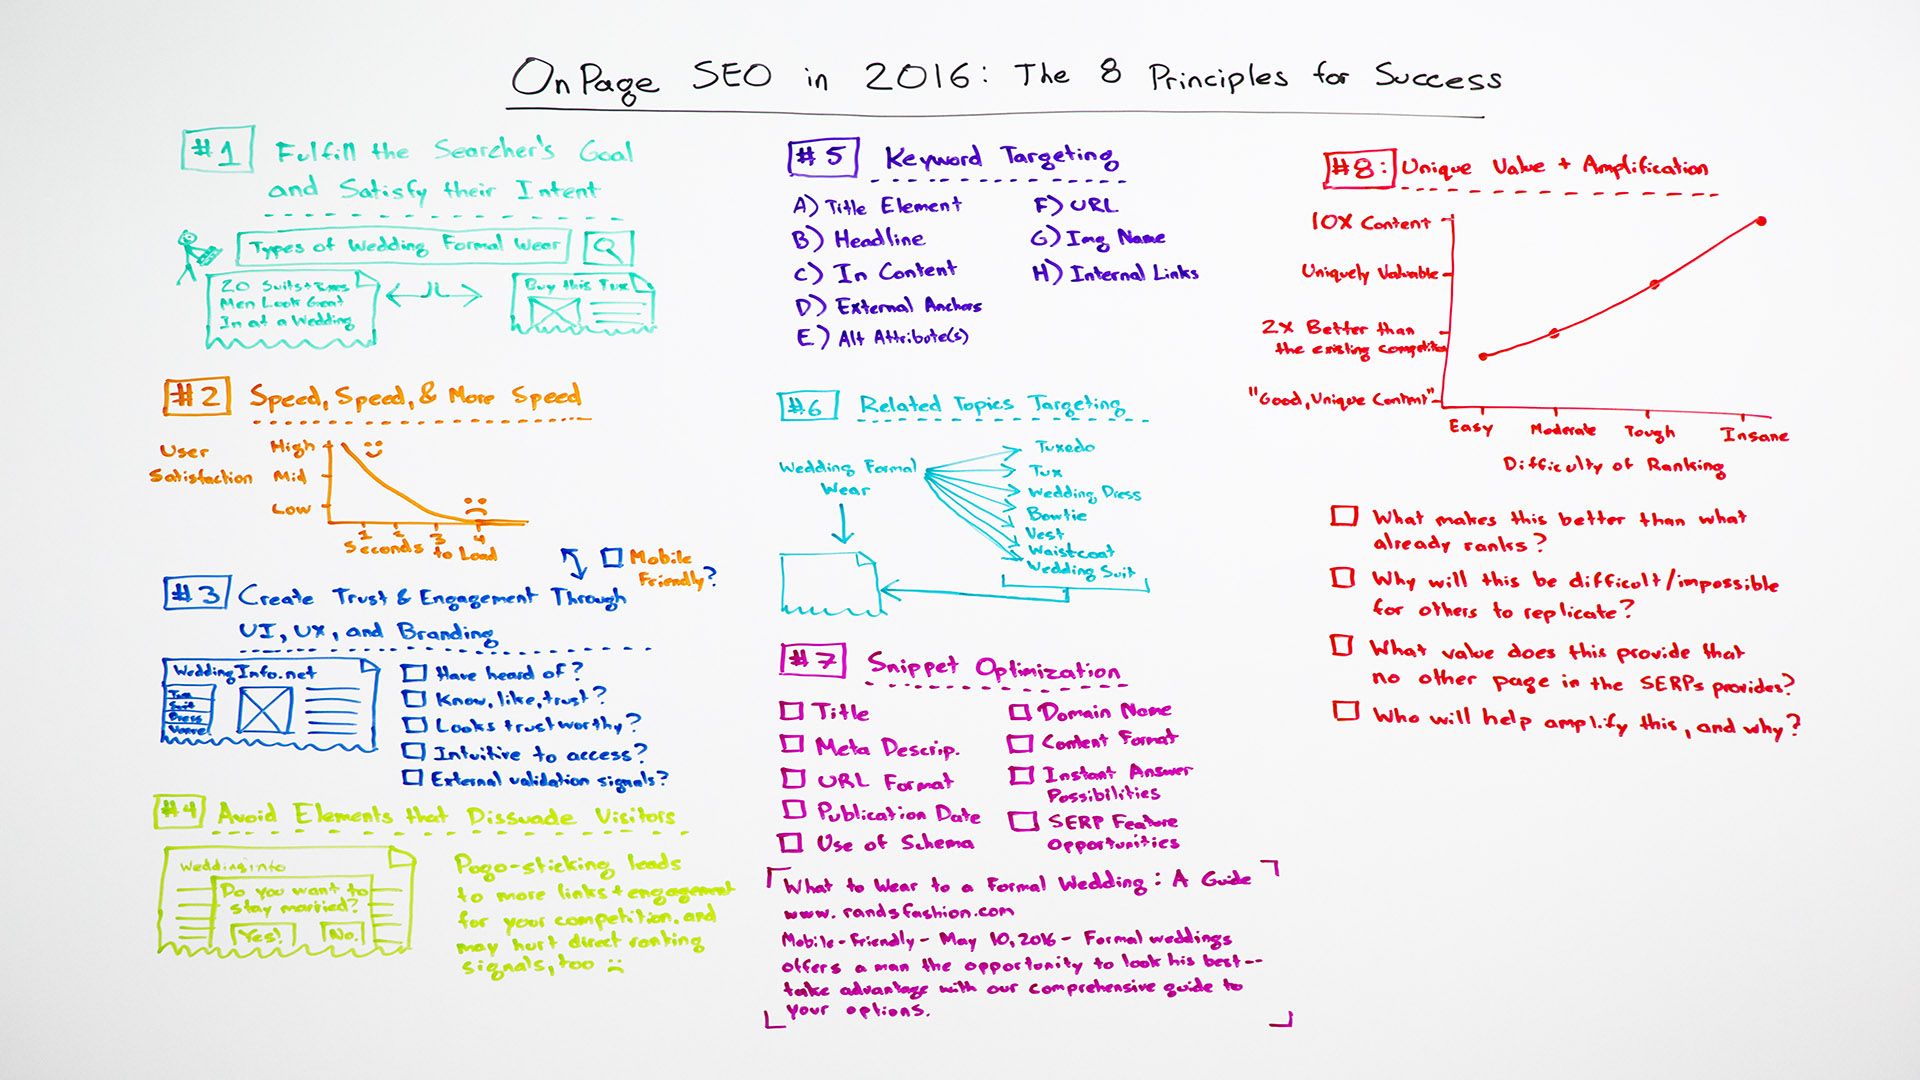 Доска Moz - On-Page SEO in 2016: The 8 Principles for Success